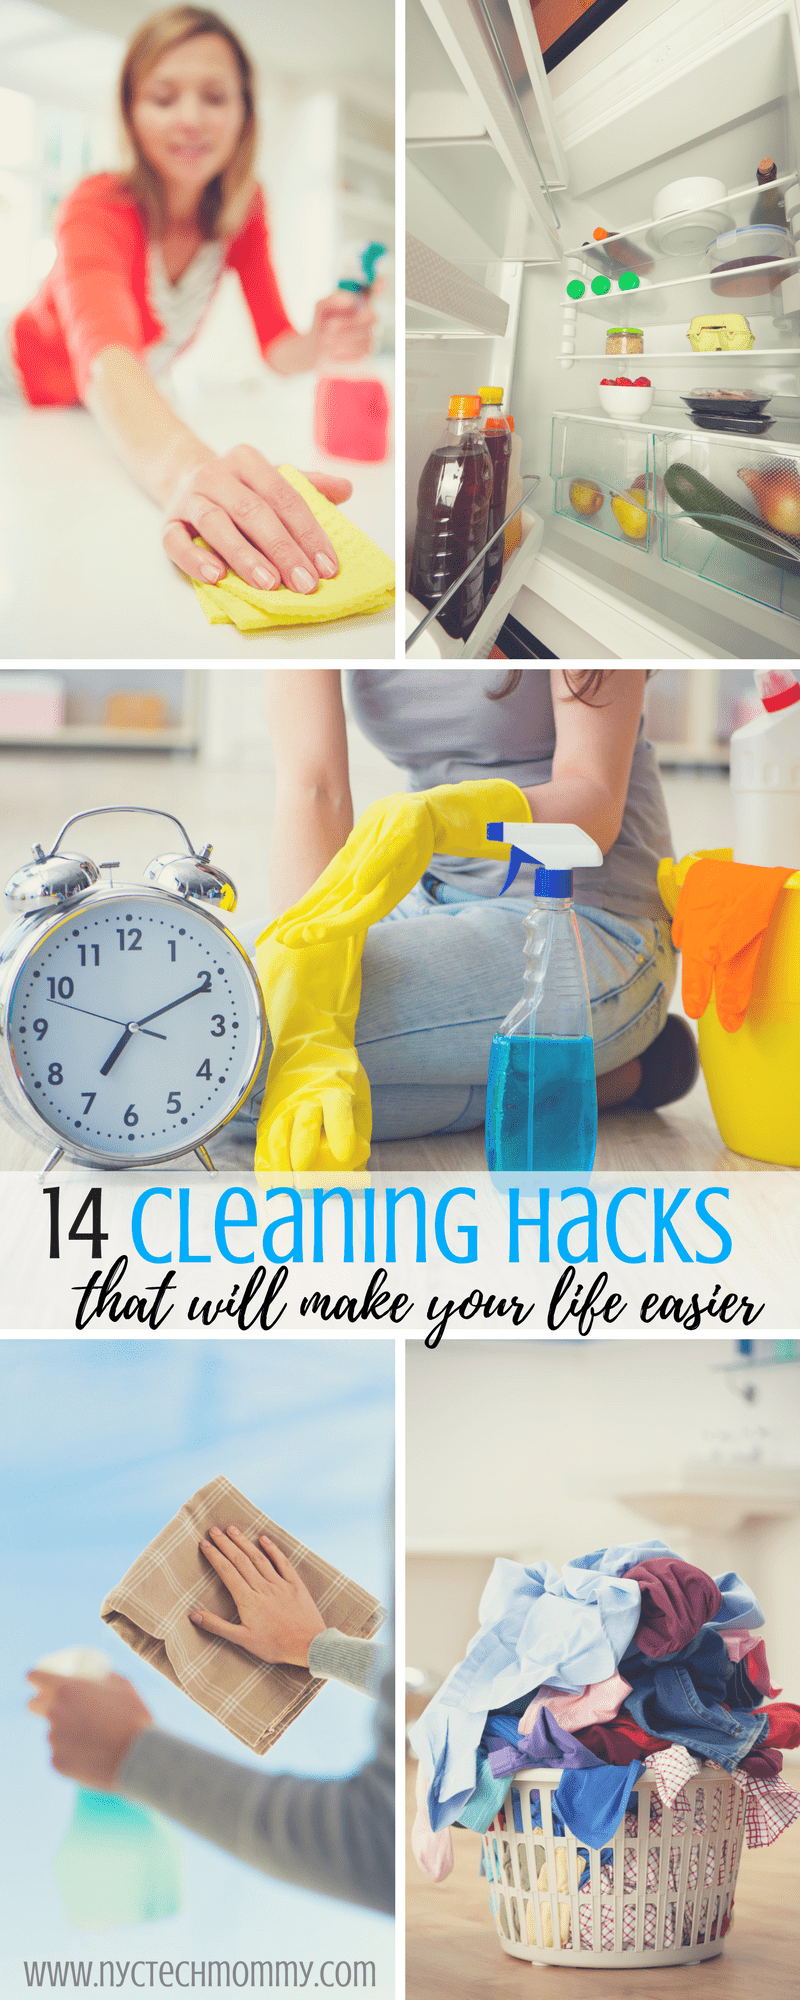 https://www.nyctechmommy.com/wp-content/uploads/2018/03/Cleaning-Hacks.png